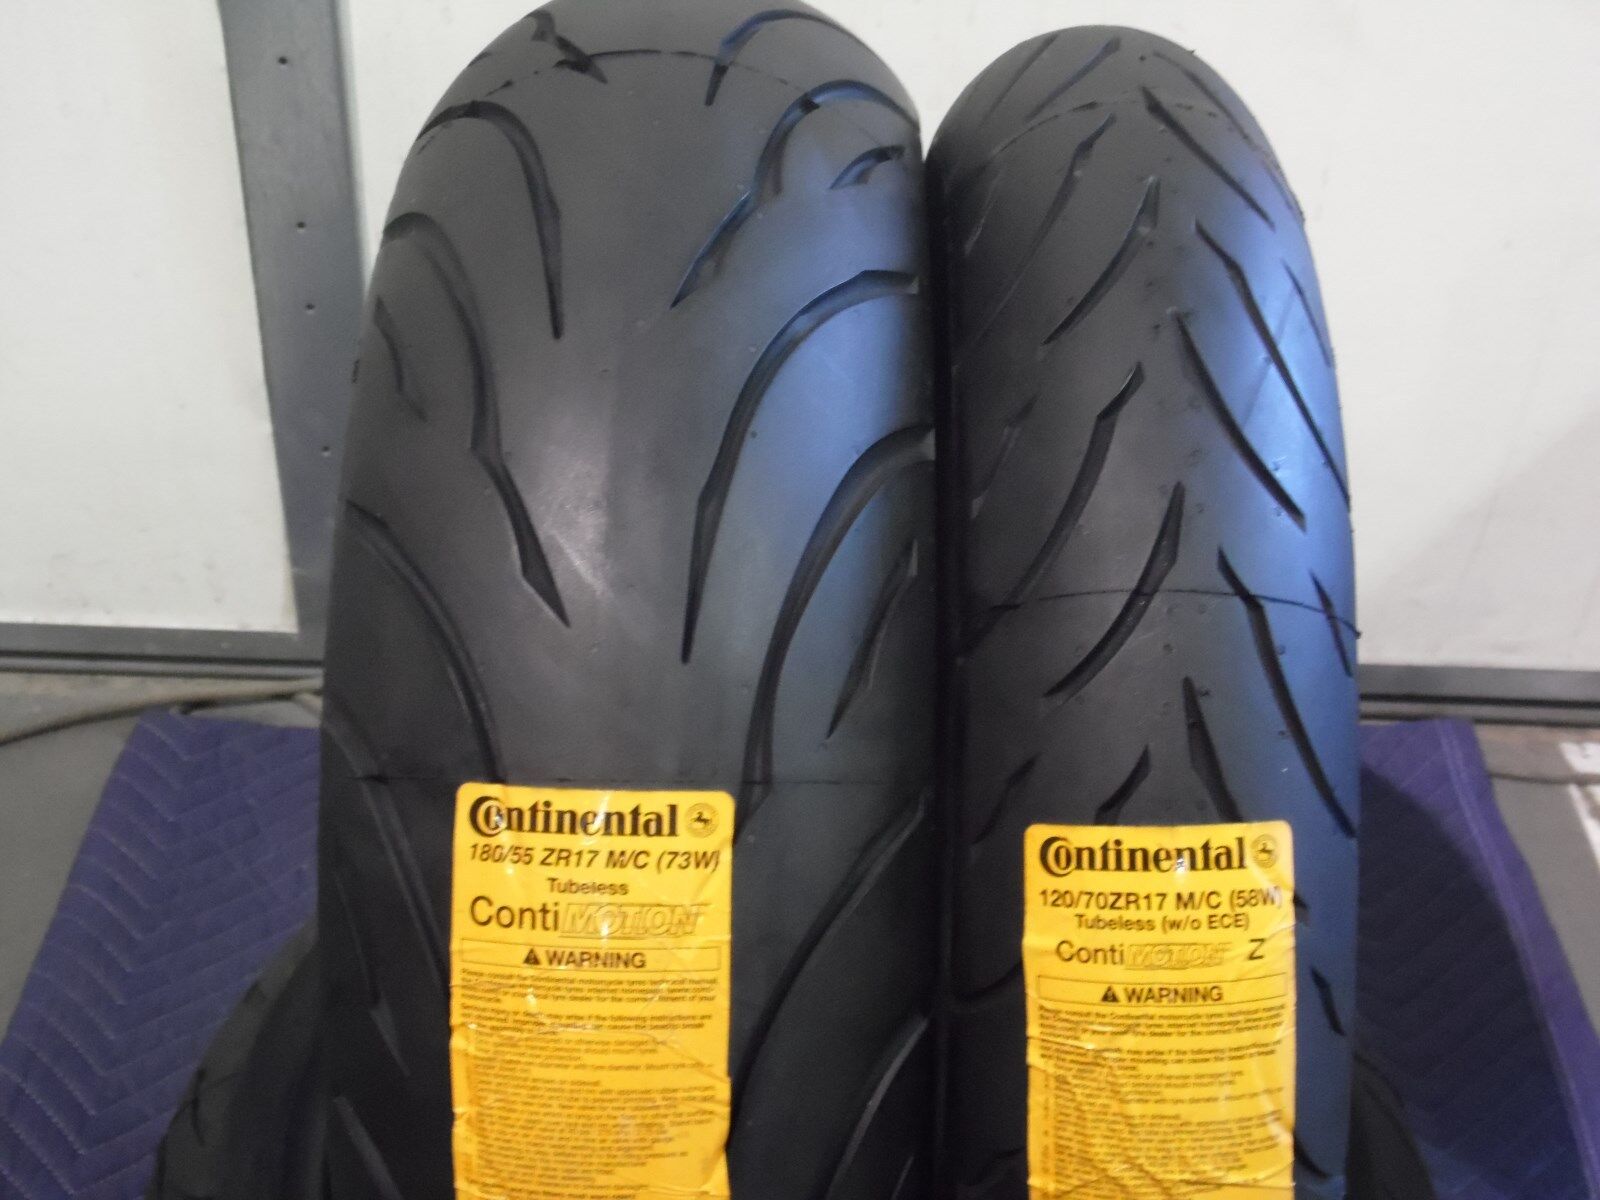 120/70ZR17 & 180/55ZR17 CONTINENTAL MOTORCYCLE 2 TIRE SET 120/70-17 180/55-17